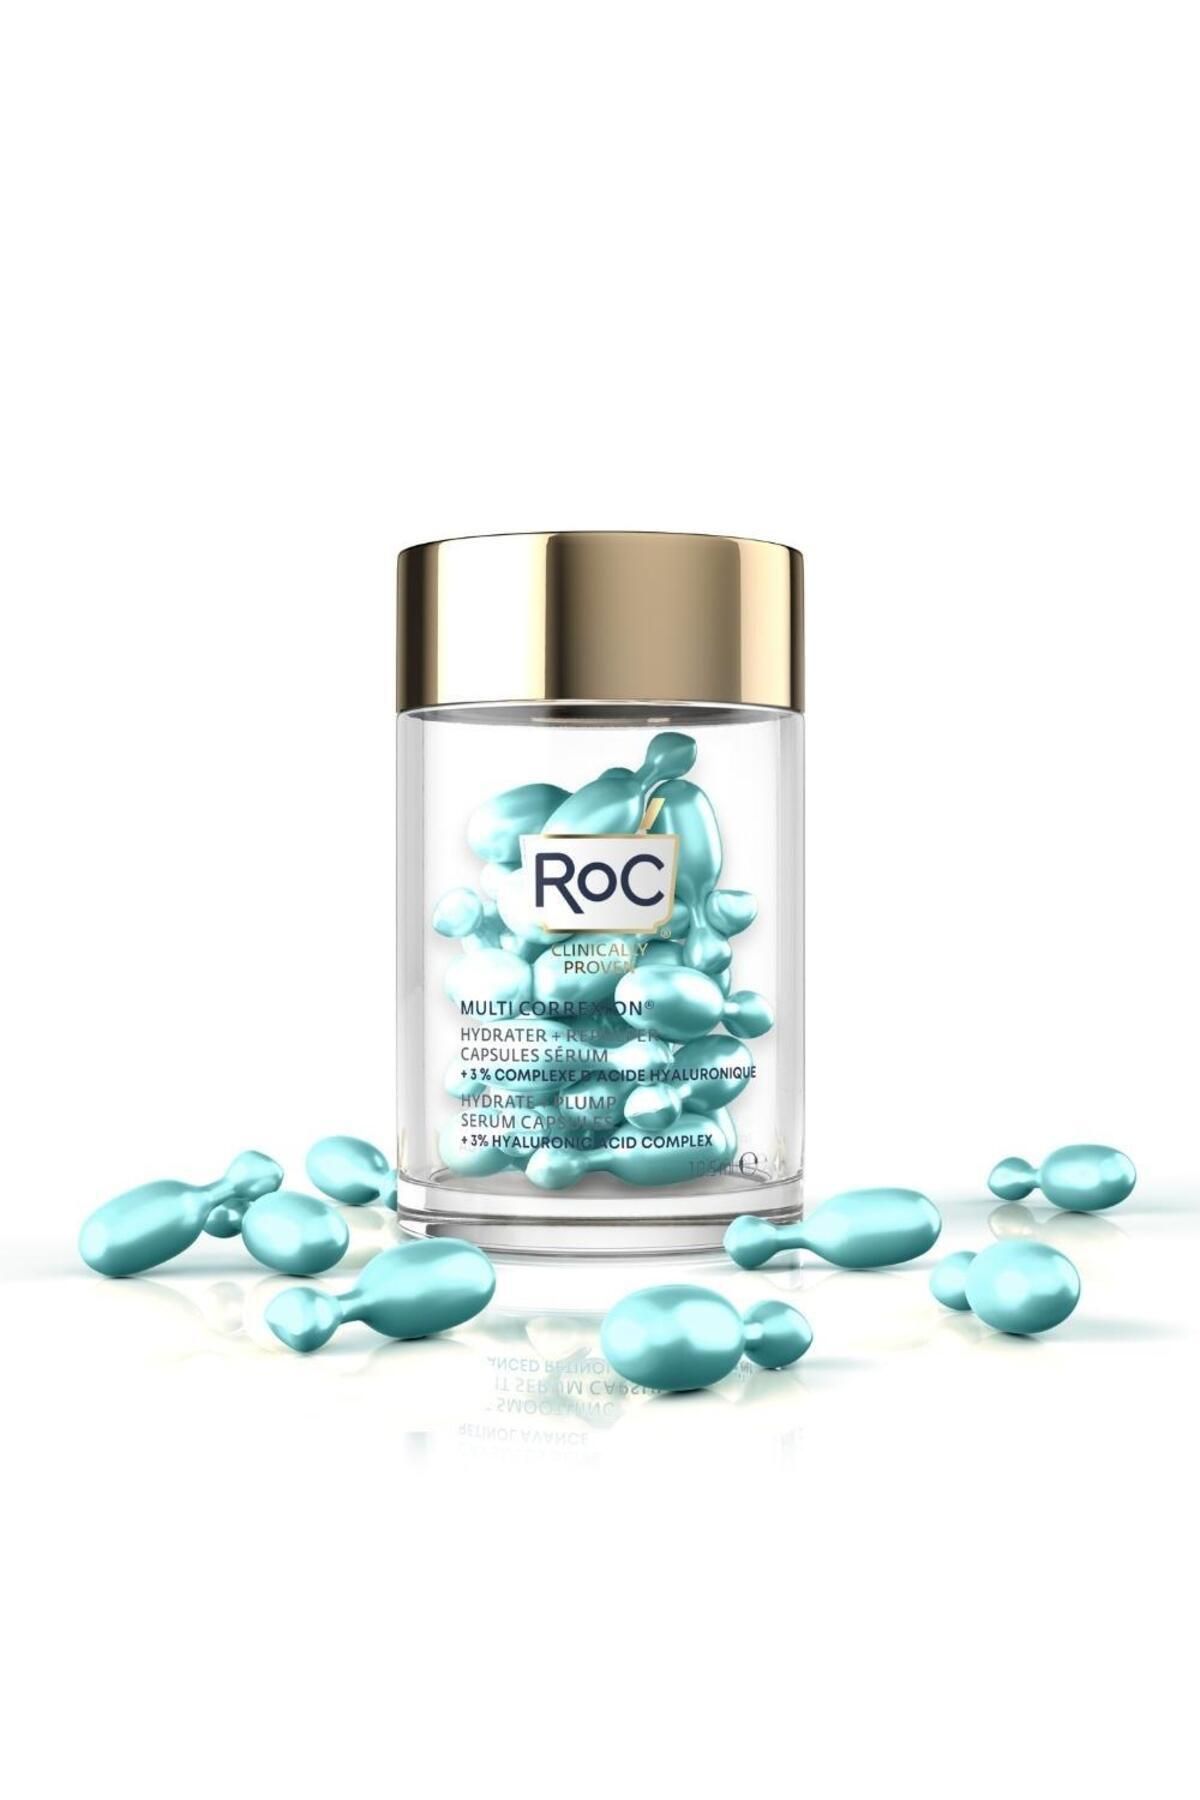 Roc CAPSULE SERUM 30 PİECES, REDUCİNG LİNES AND WRİNKLES, GİVİNG MOİSTURE AND VİTALİTY DEMBA1481